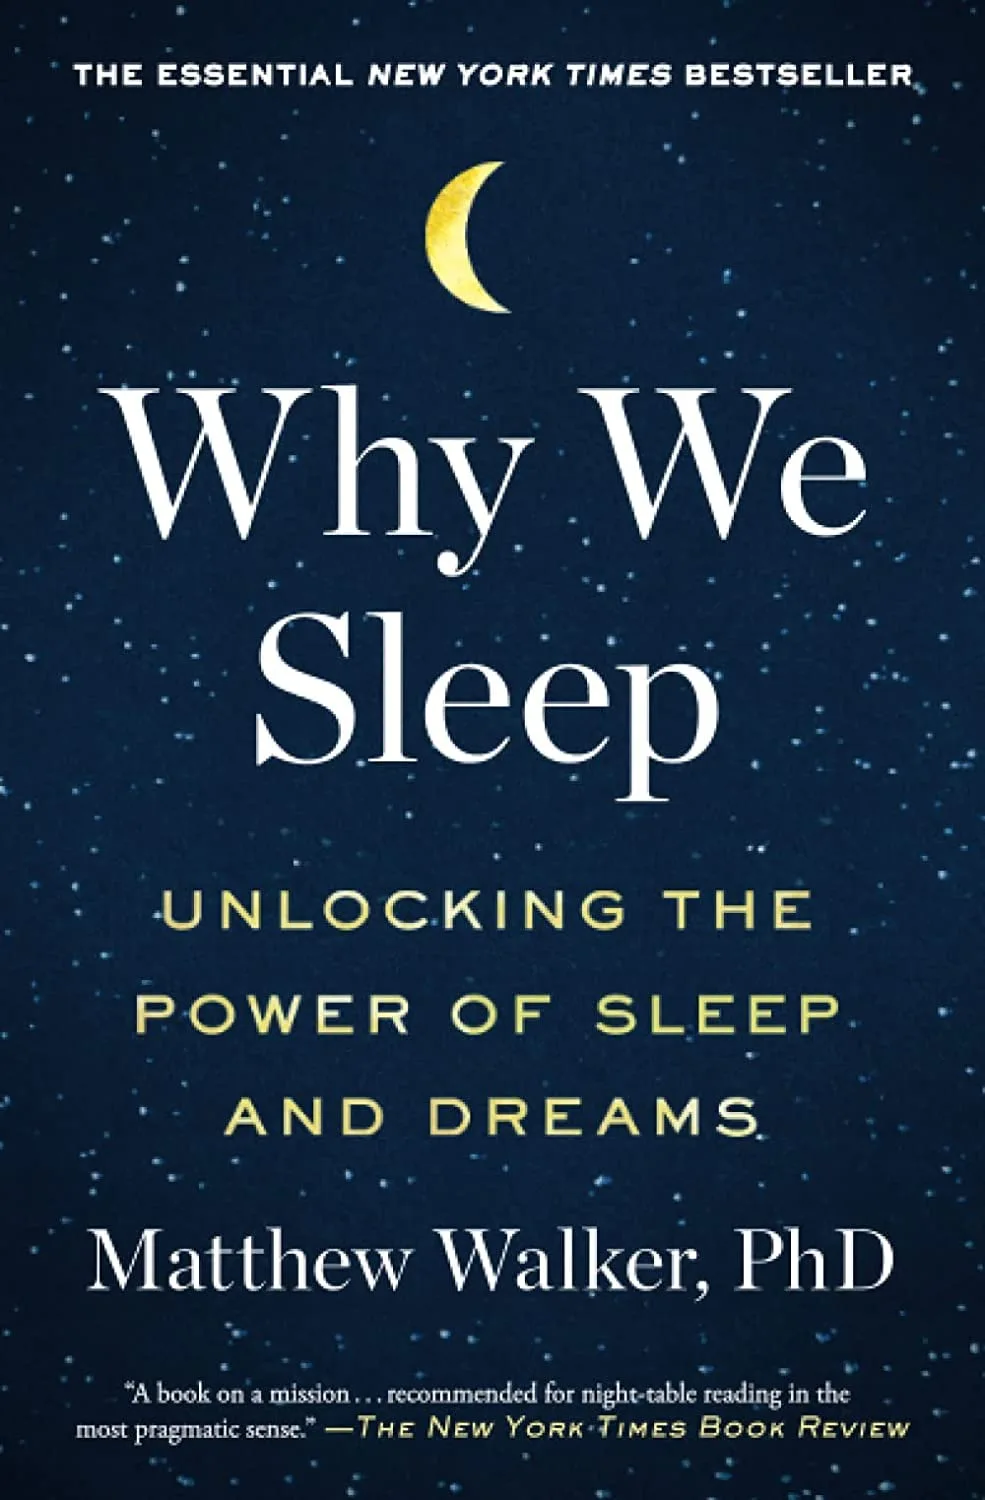 Cover of the book titled 'Why We Sleep' by Matthew Walker with the subtitle 'unlocking the power of sleep and dreams' a top of a background of a star filled sky in a deep color or navy blue and a crescent moon on top of the title